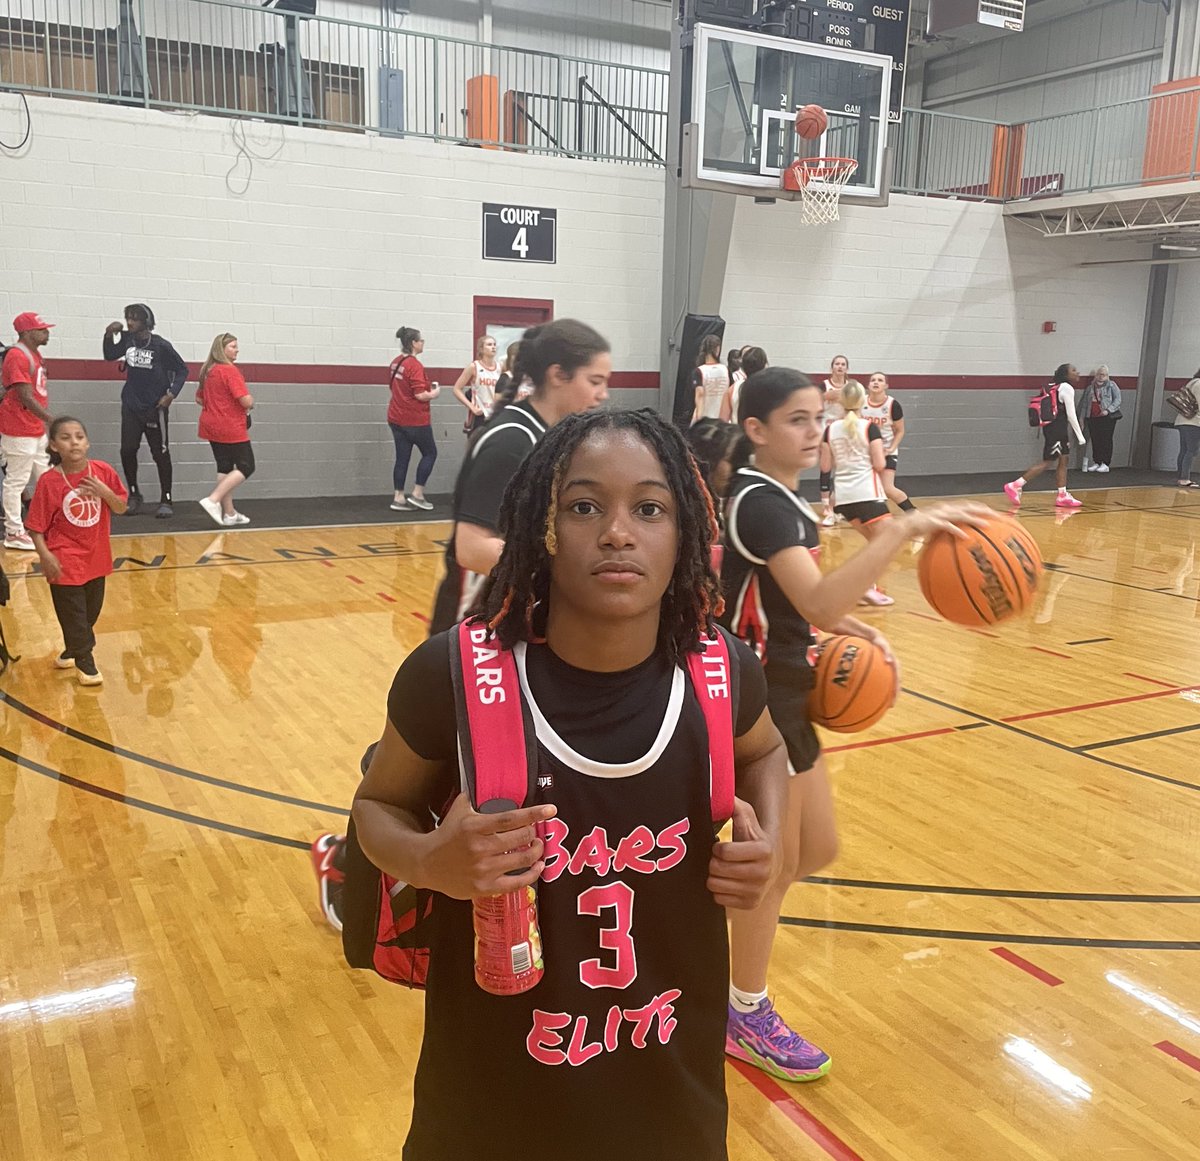 Zymirria Glanton led BARS Elite 17u to a 53-37 victory over Cam Sports. Glanton poured in 23 points knocking down 4 threes, as well as getting to the basket in time and time again.